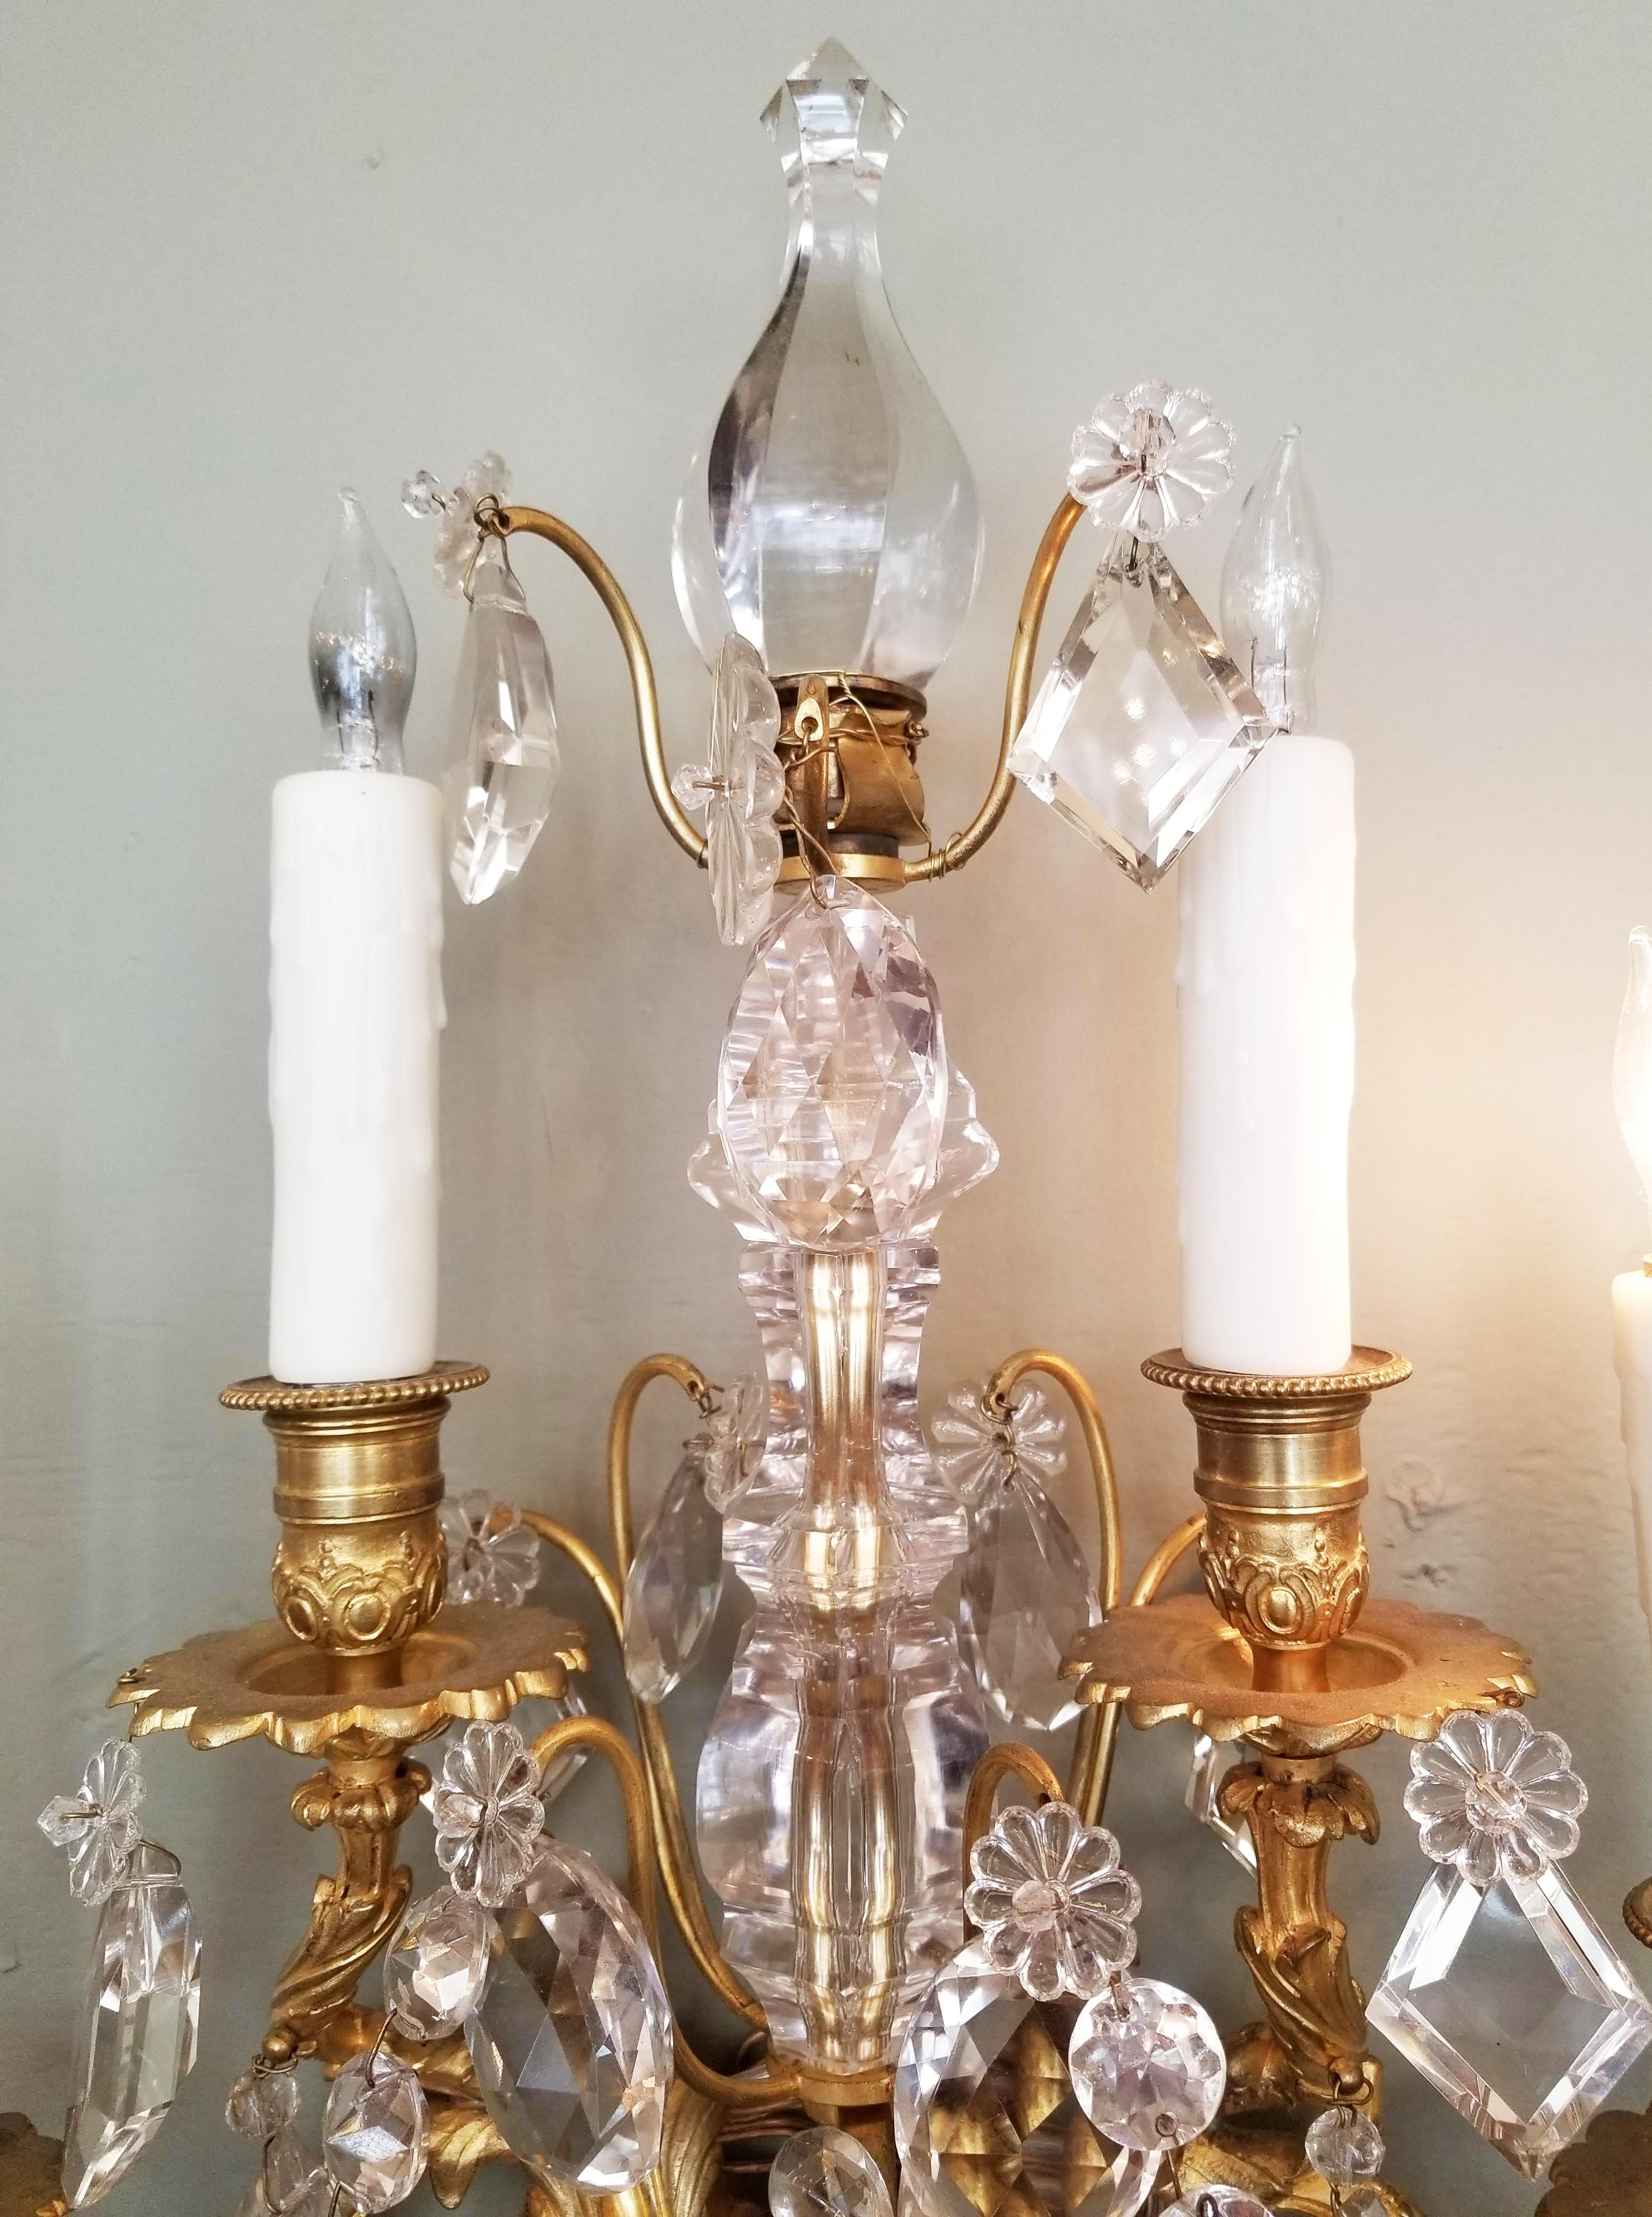 This elegant pair of Regency doré sconces, 19th Century, possibly 1820, feature a crystal top finial above four doré chased bronze candle arms that are accented with crystal swags and pendants. The center of the sconces have large Irish cut crystal